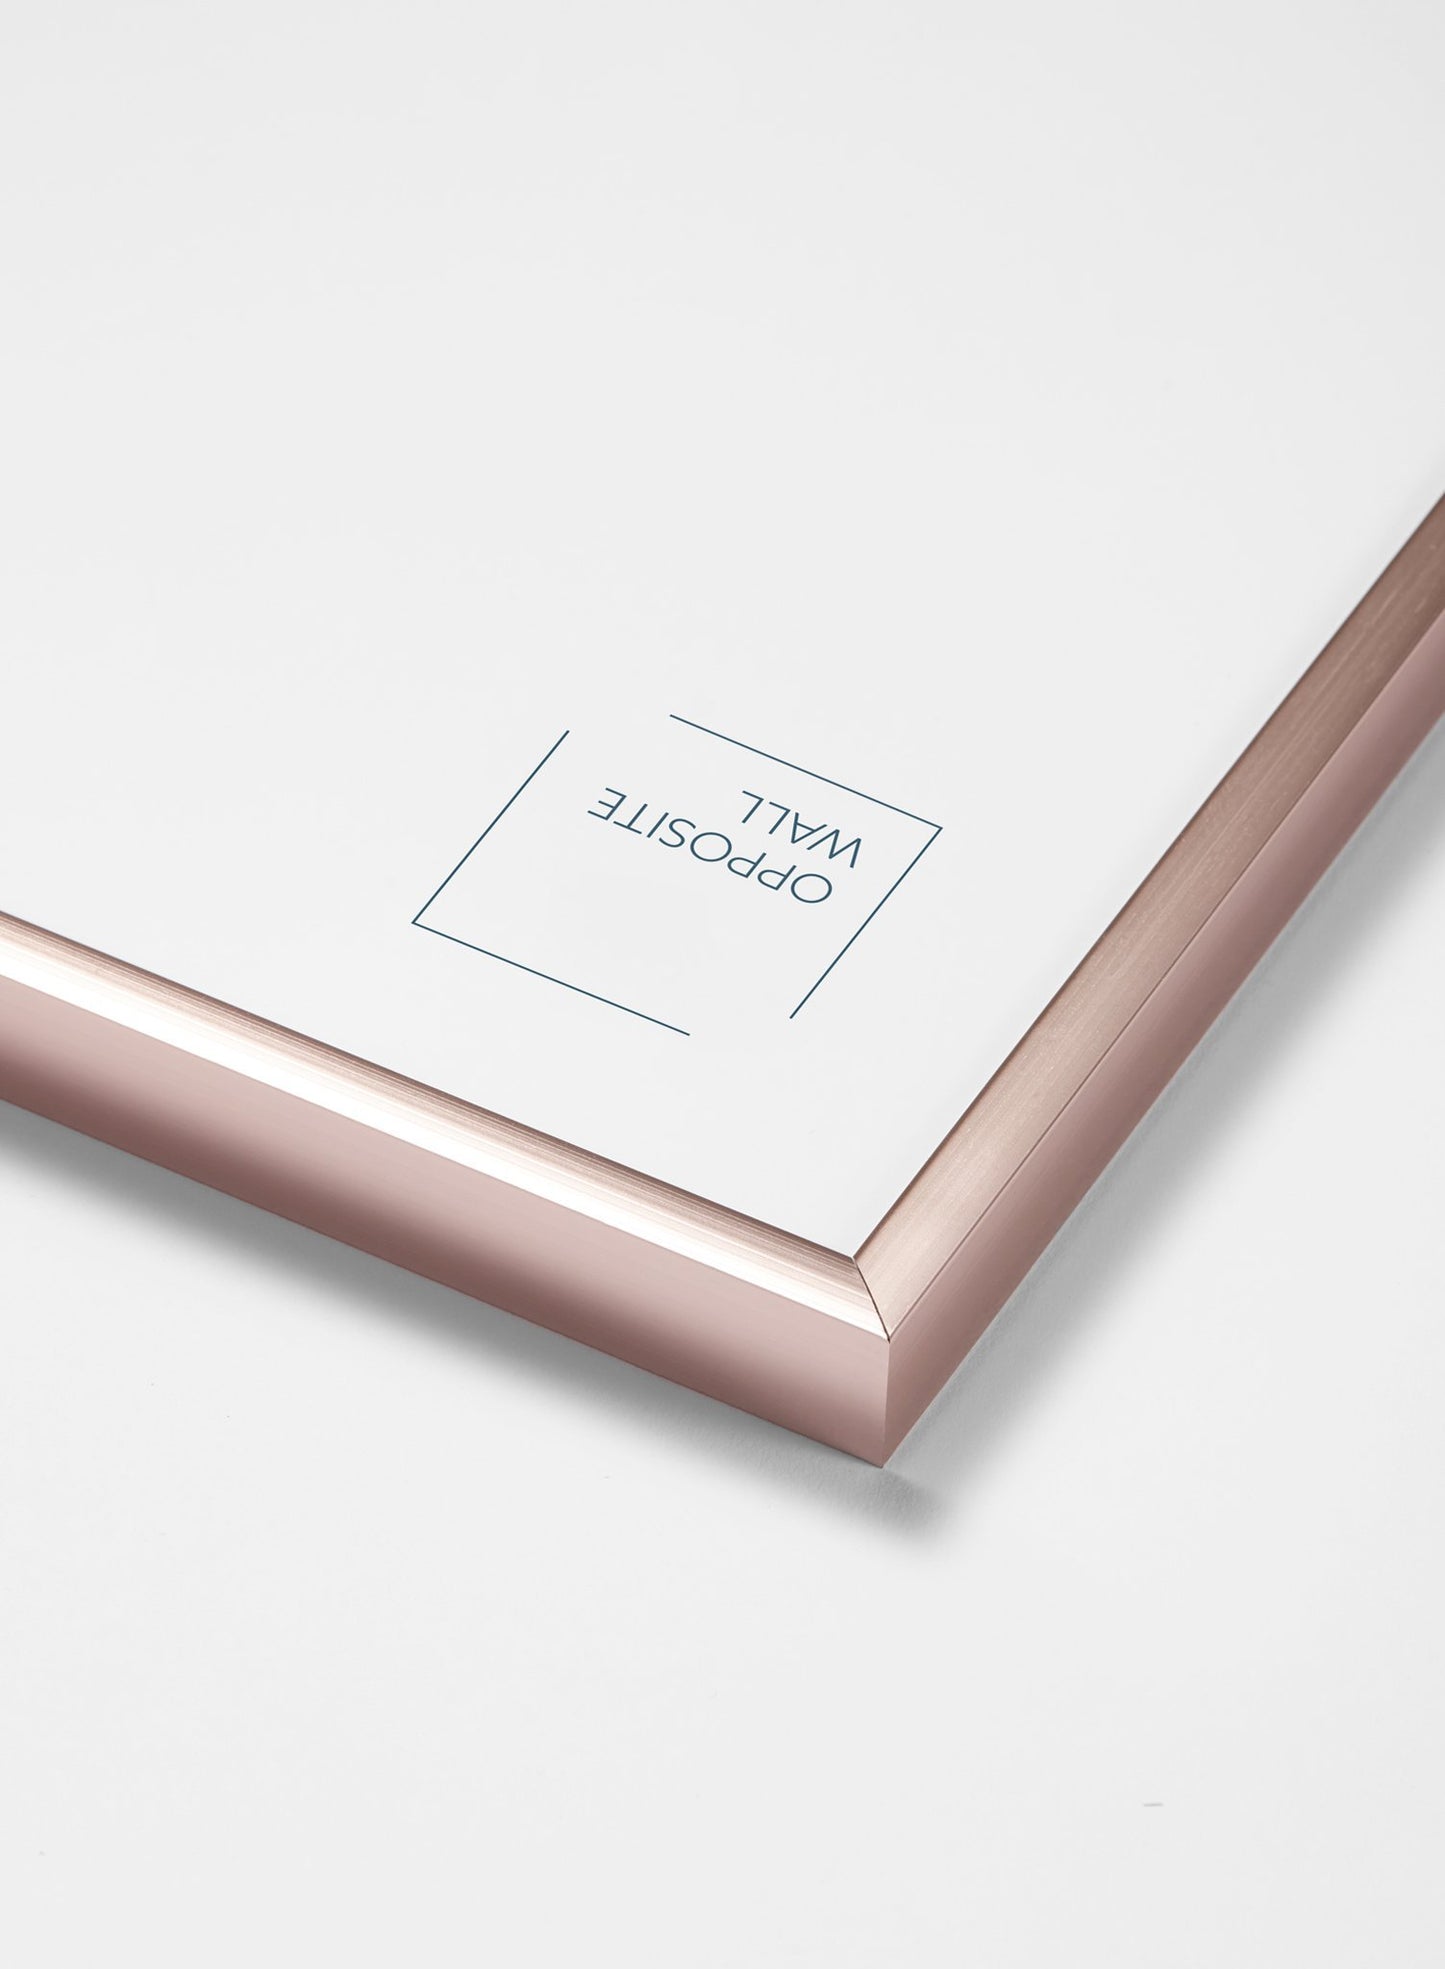 Scandinavian rose gold aluminum metal frame by Opposite Wall - Corner of the frame - Size 20x28 inches